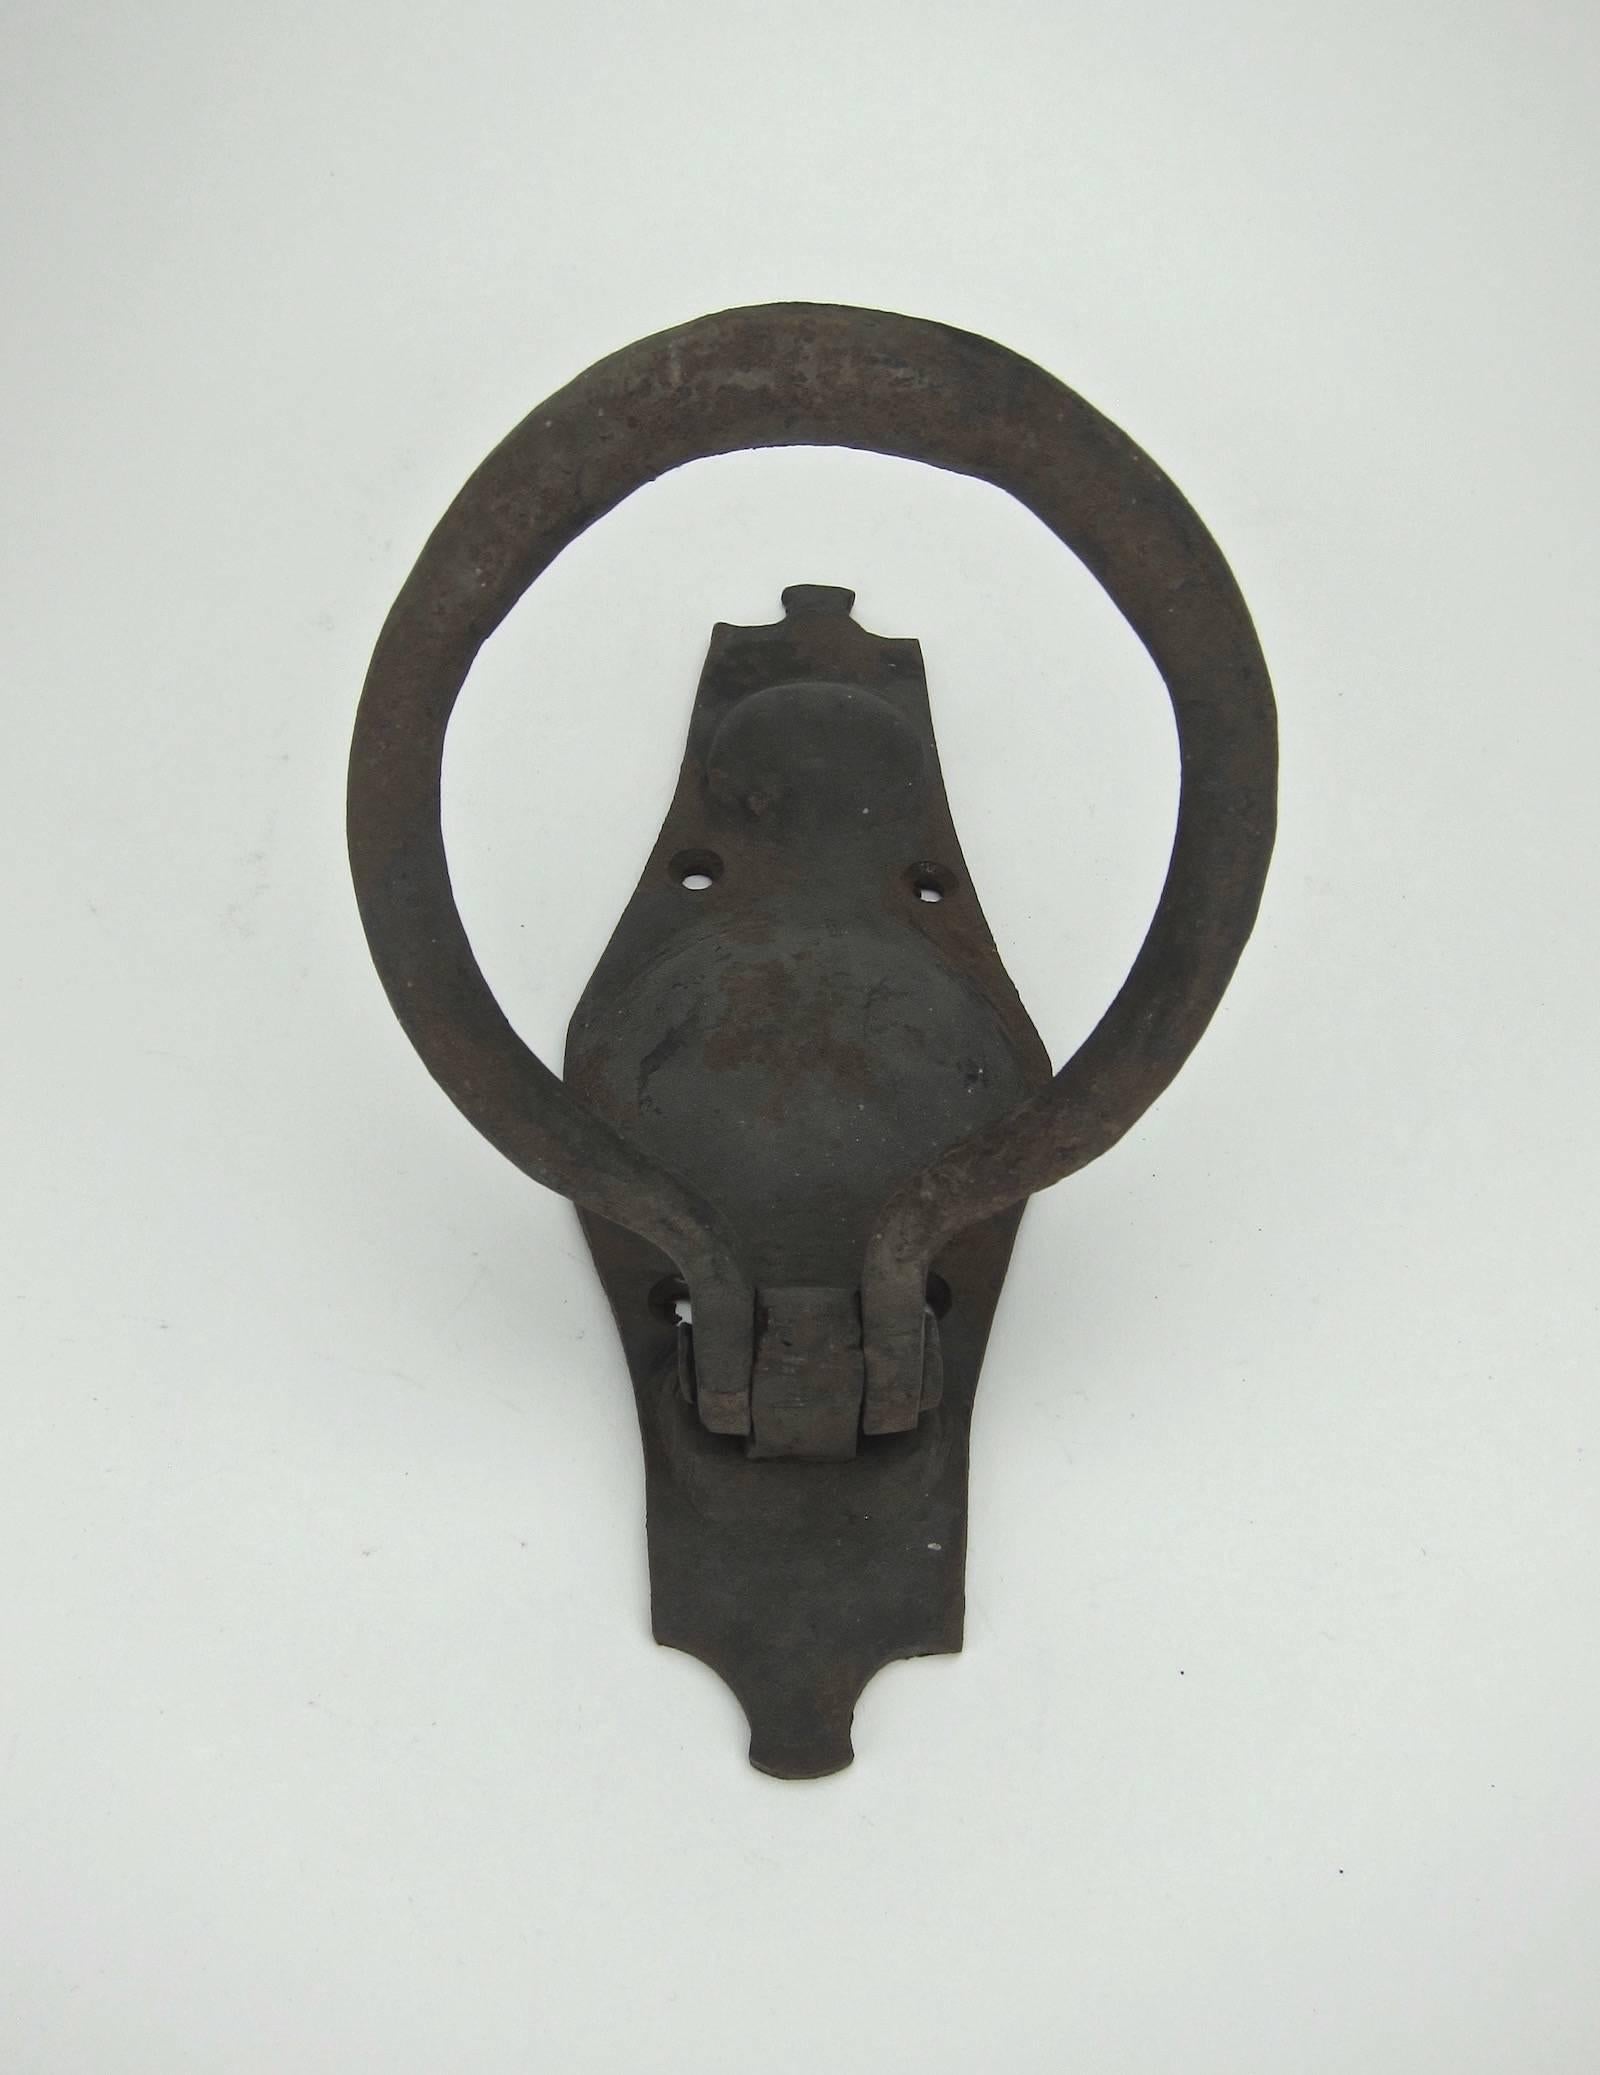 Arts and Crafts Antique Iron Door Knocker by Marie Zimmermann